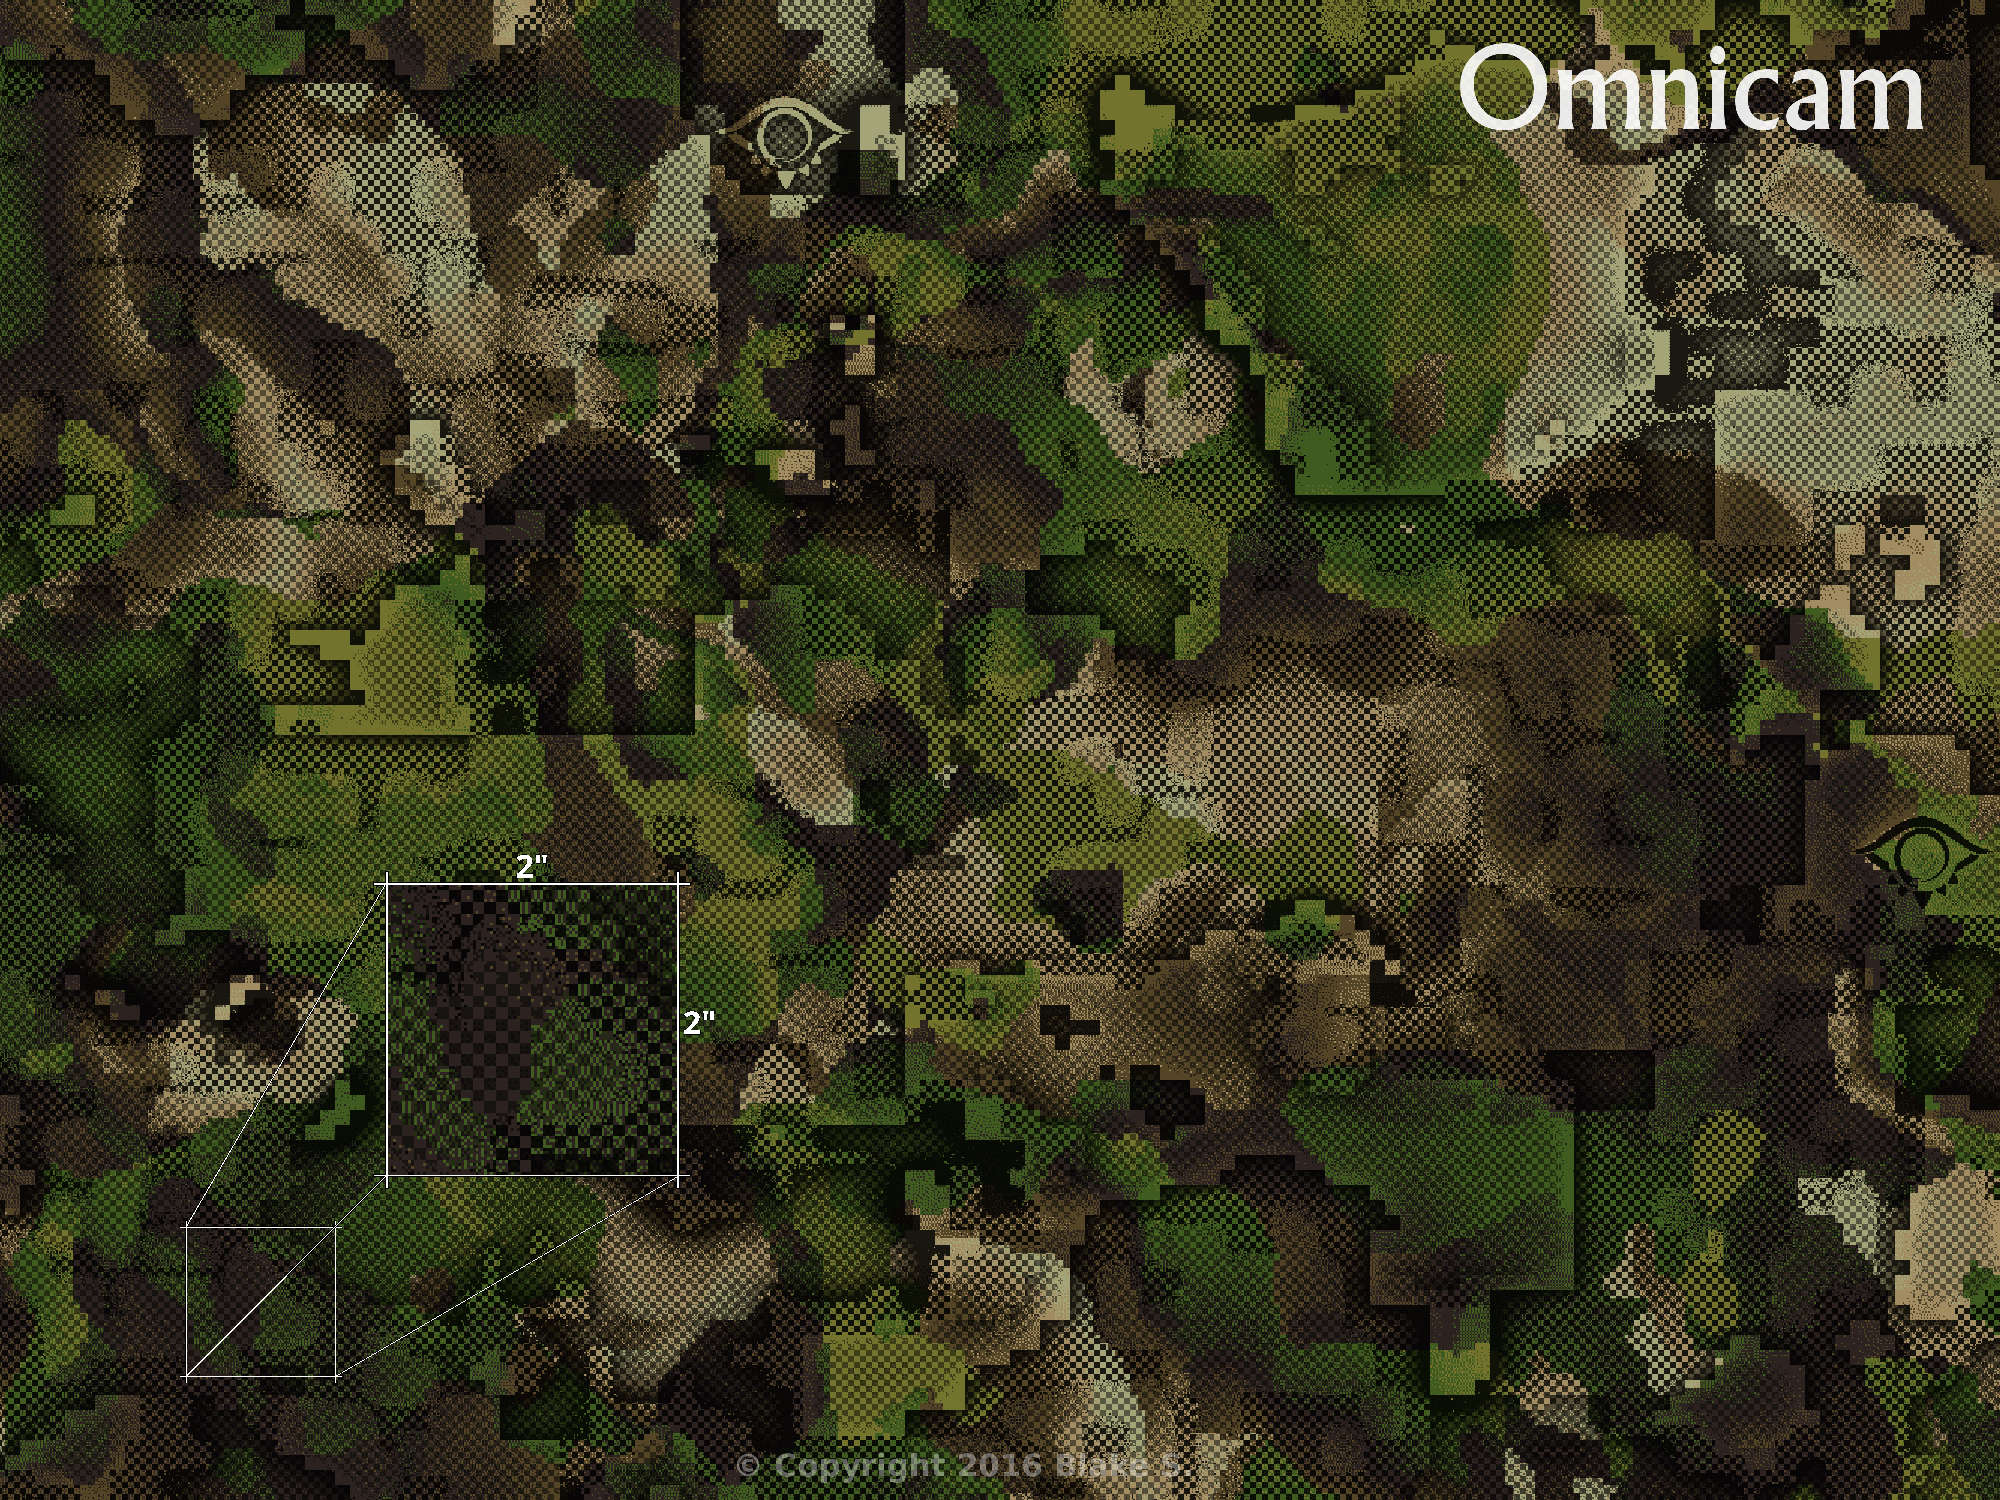 Omnicam biomimetic camouflage by Omnitac. Shown in transitional, woodland, color pallet.